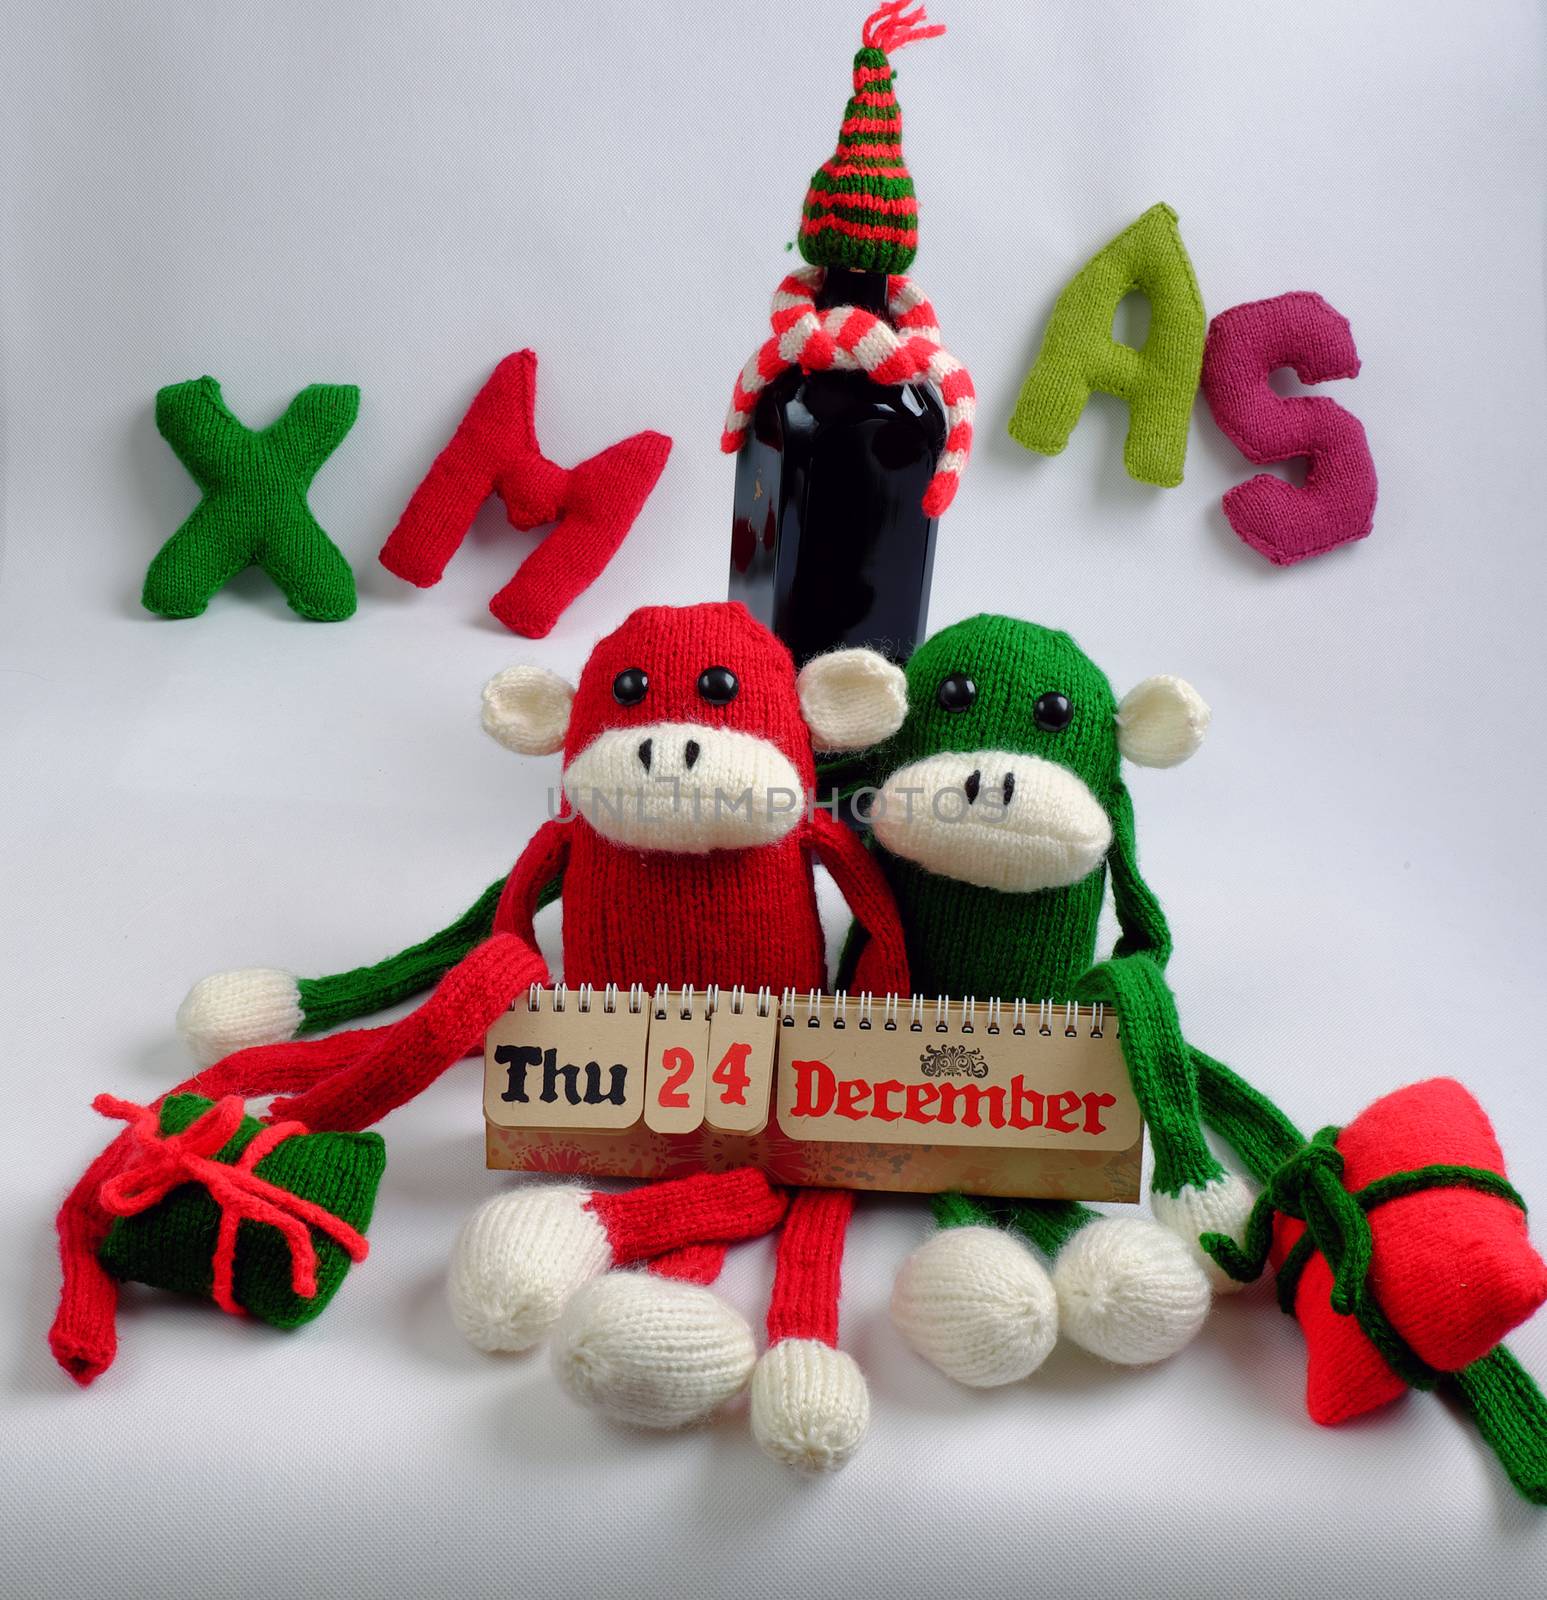 Funny Christmas background, two knitted monkey hold noel wine bottle, Xmas alphabet in red and green yarn, symbol to merry christmas and happy new year, a year of monkeys